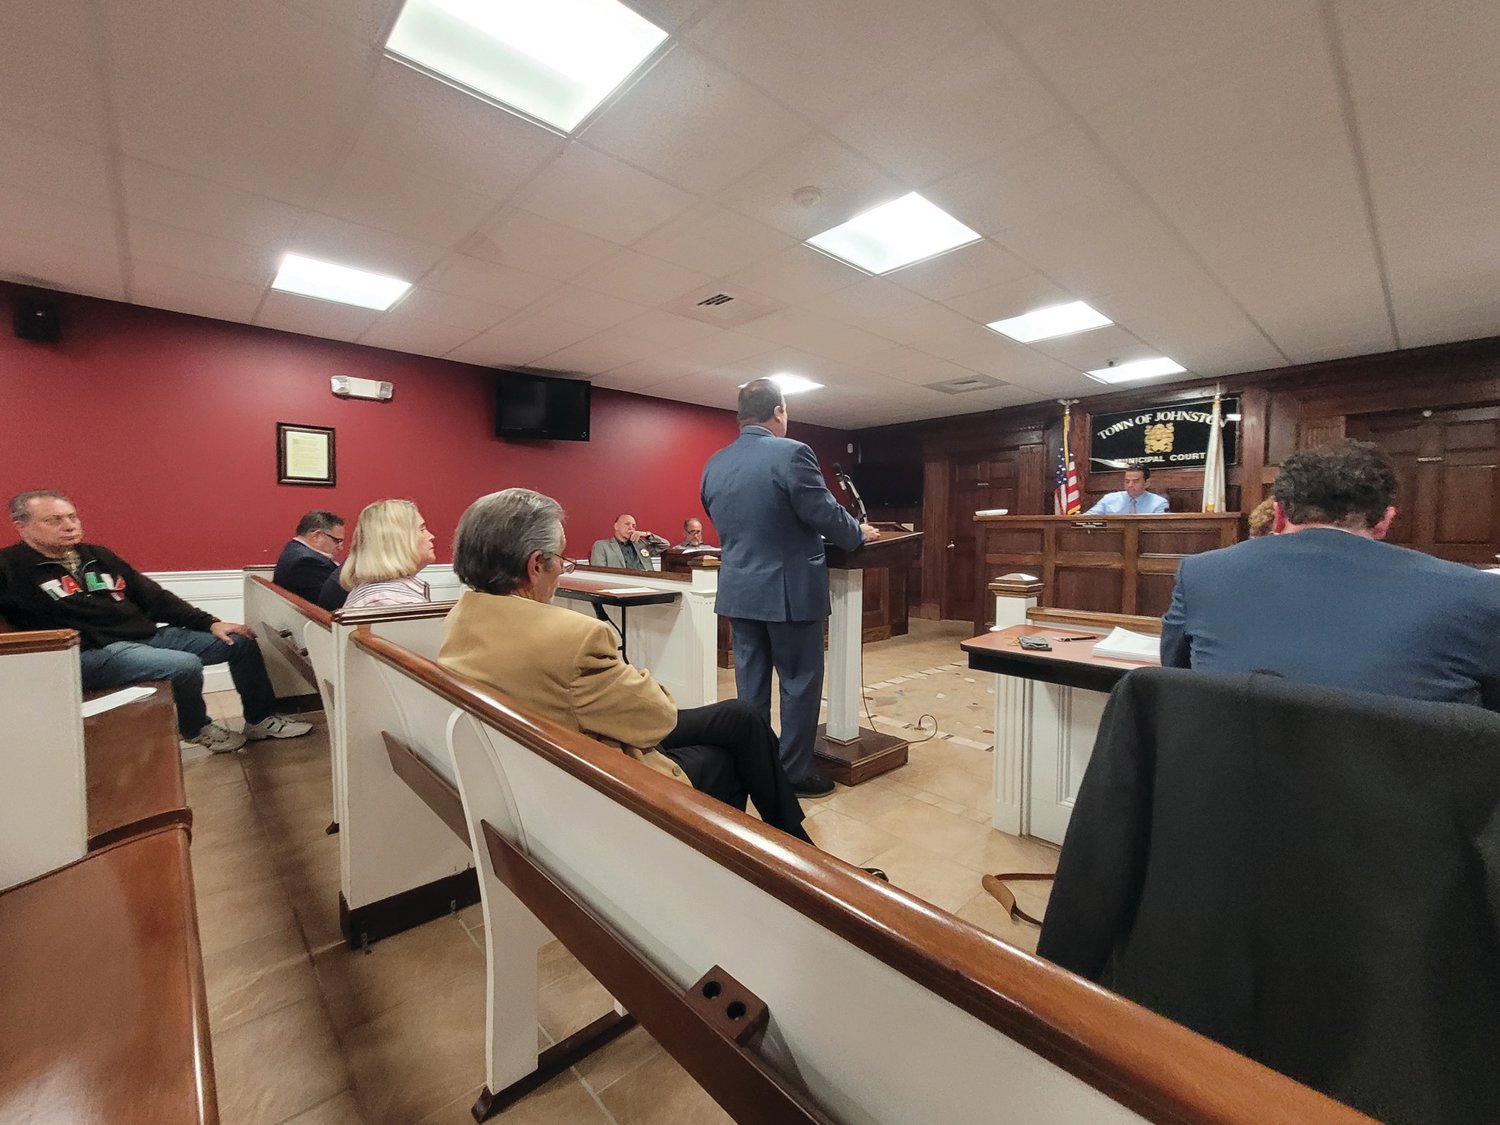 SPEAKER OF THE HOUSE: Attorney K. Joseph Shekarchi, who also serves as Rhode Island’s Speaker of the House, addresses Johnston Town Council last week. He was representing the owners of Bar 101.